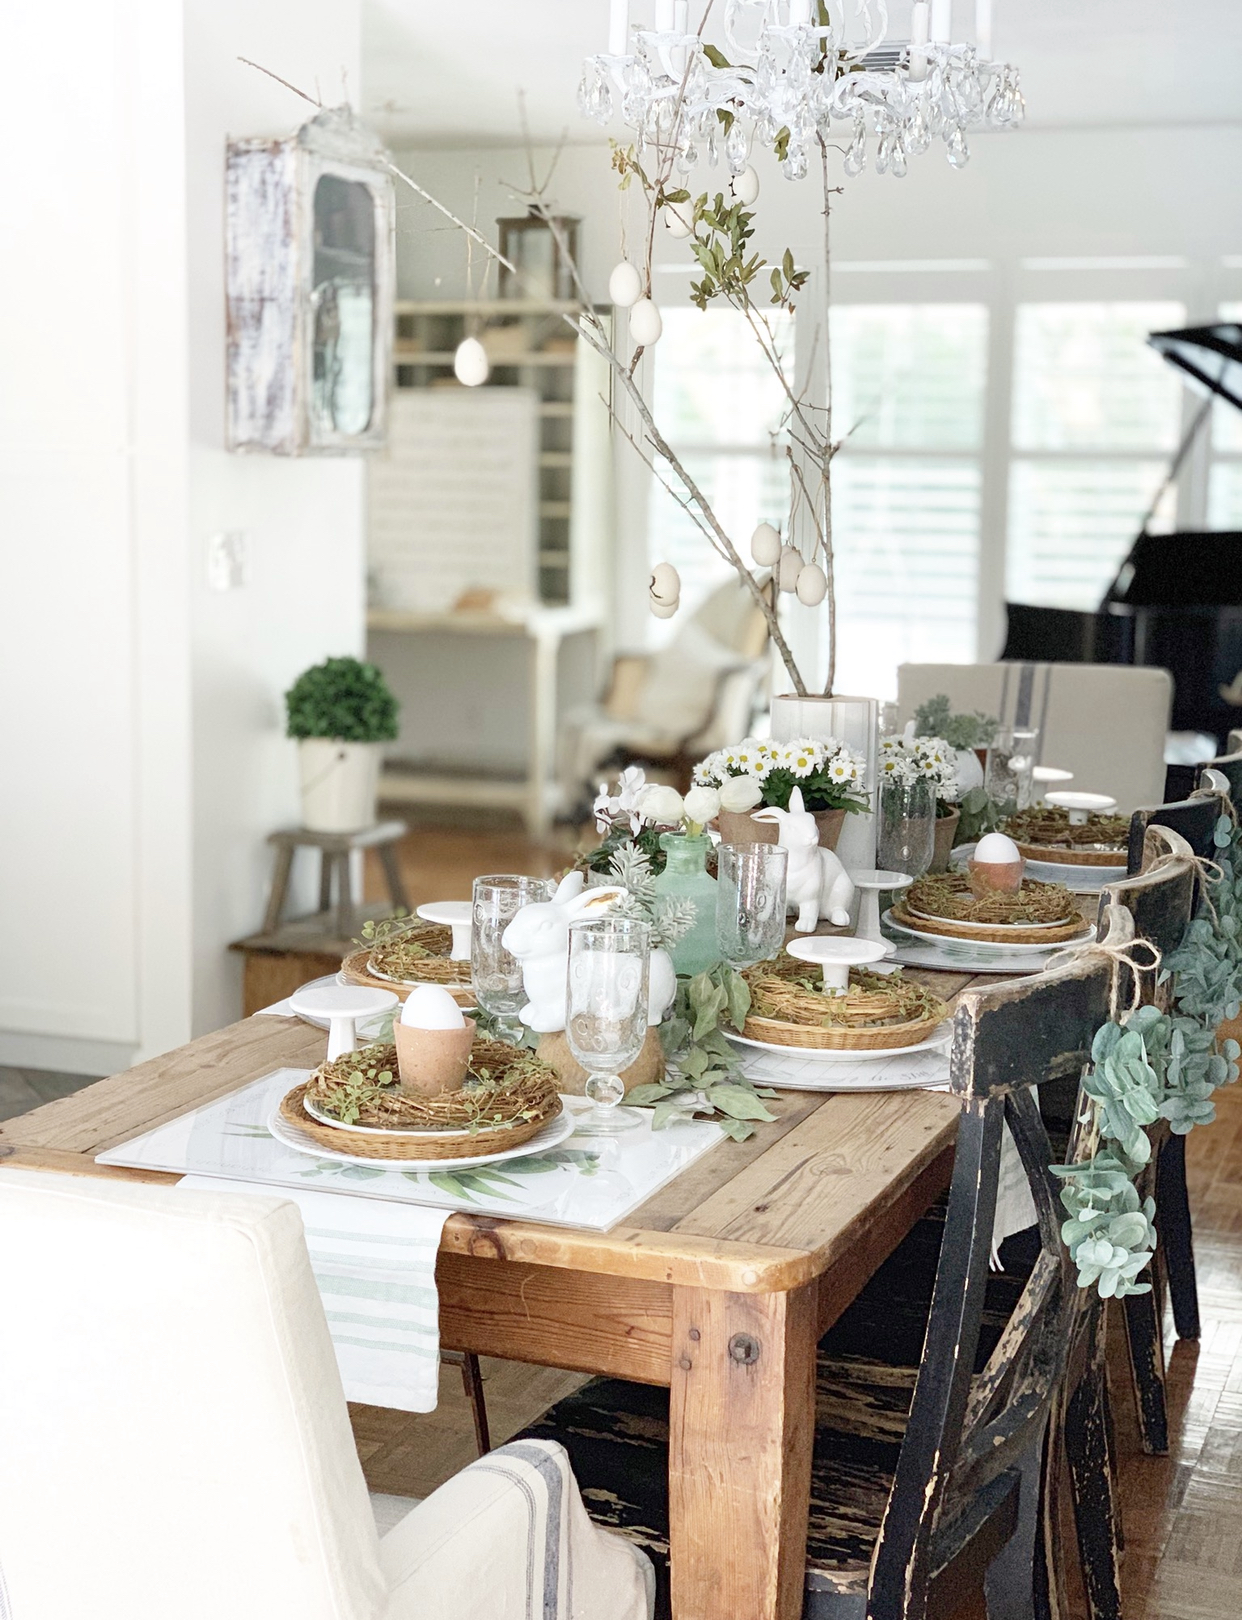 wide view of an Easter table setting with bunnies, greenery, and a beautiful table runner